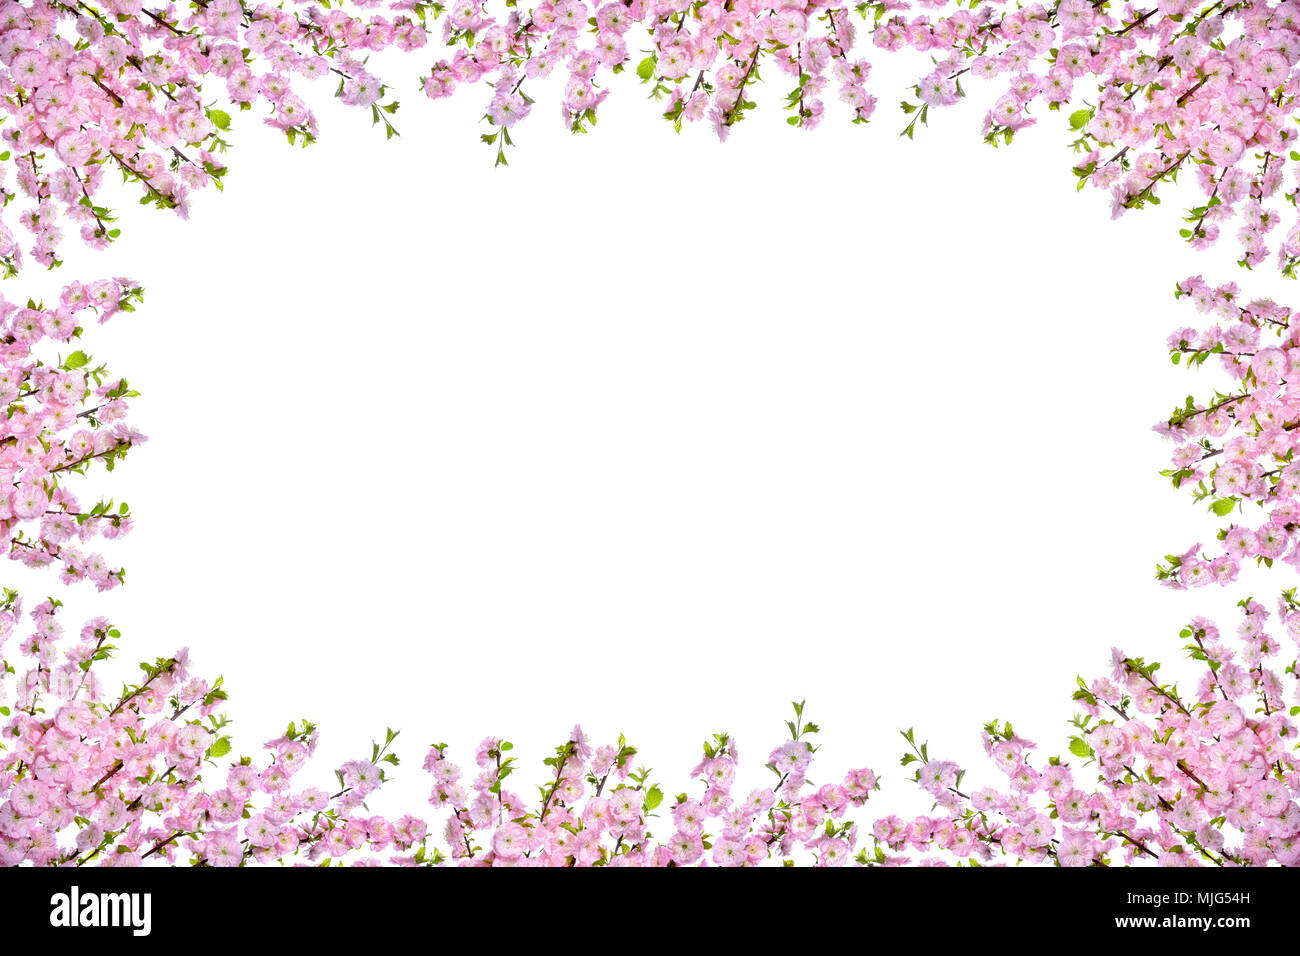 Frame with blooming almond twigs on a white background. Stock Photo